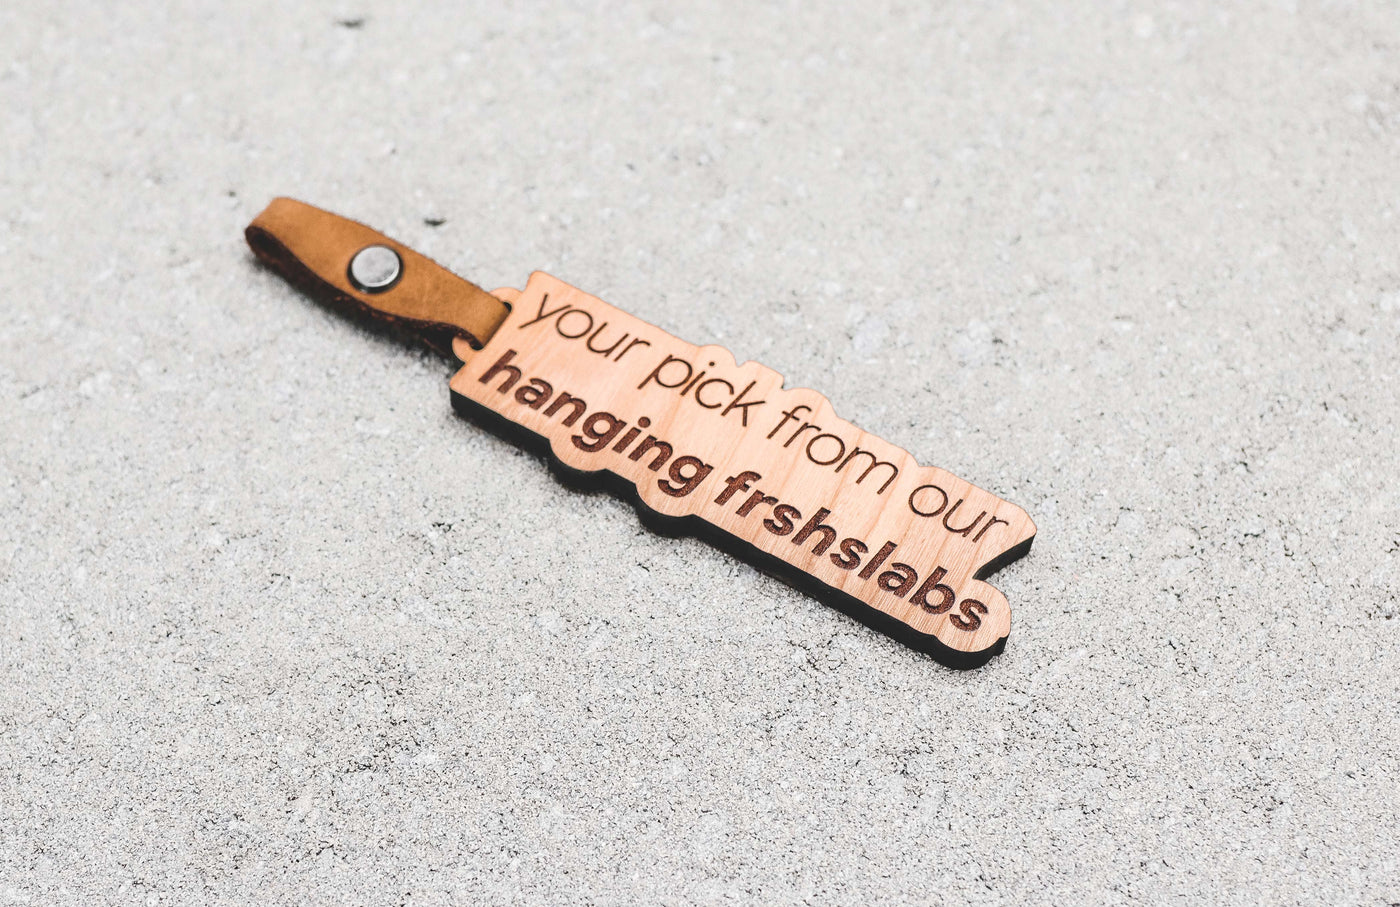 Your Pick From Our Hanging Frshslabs Keychain